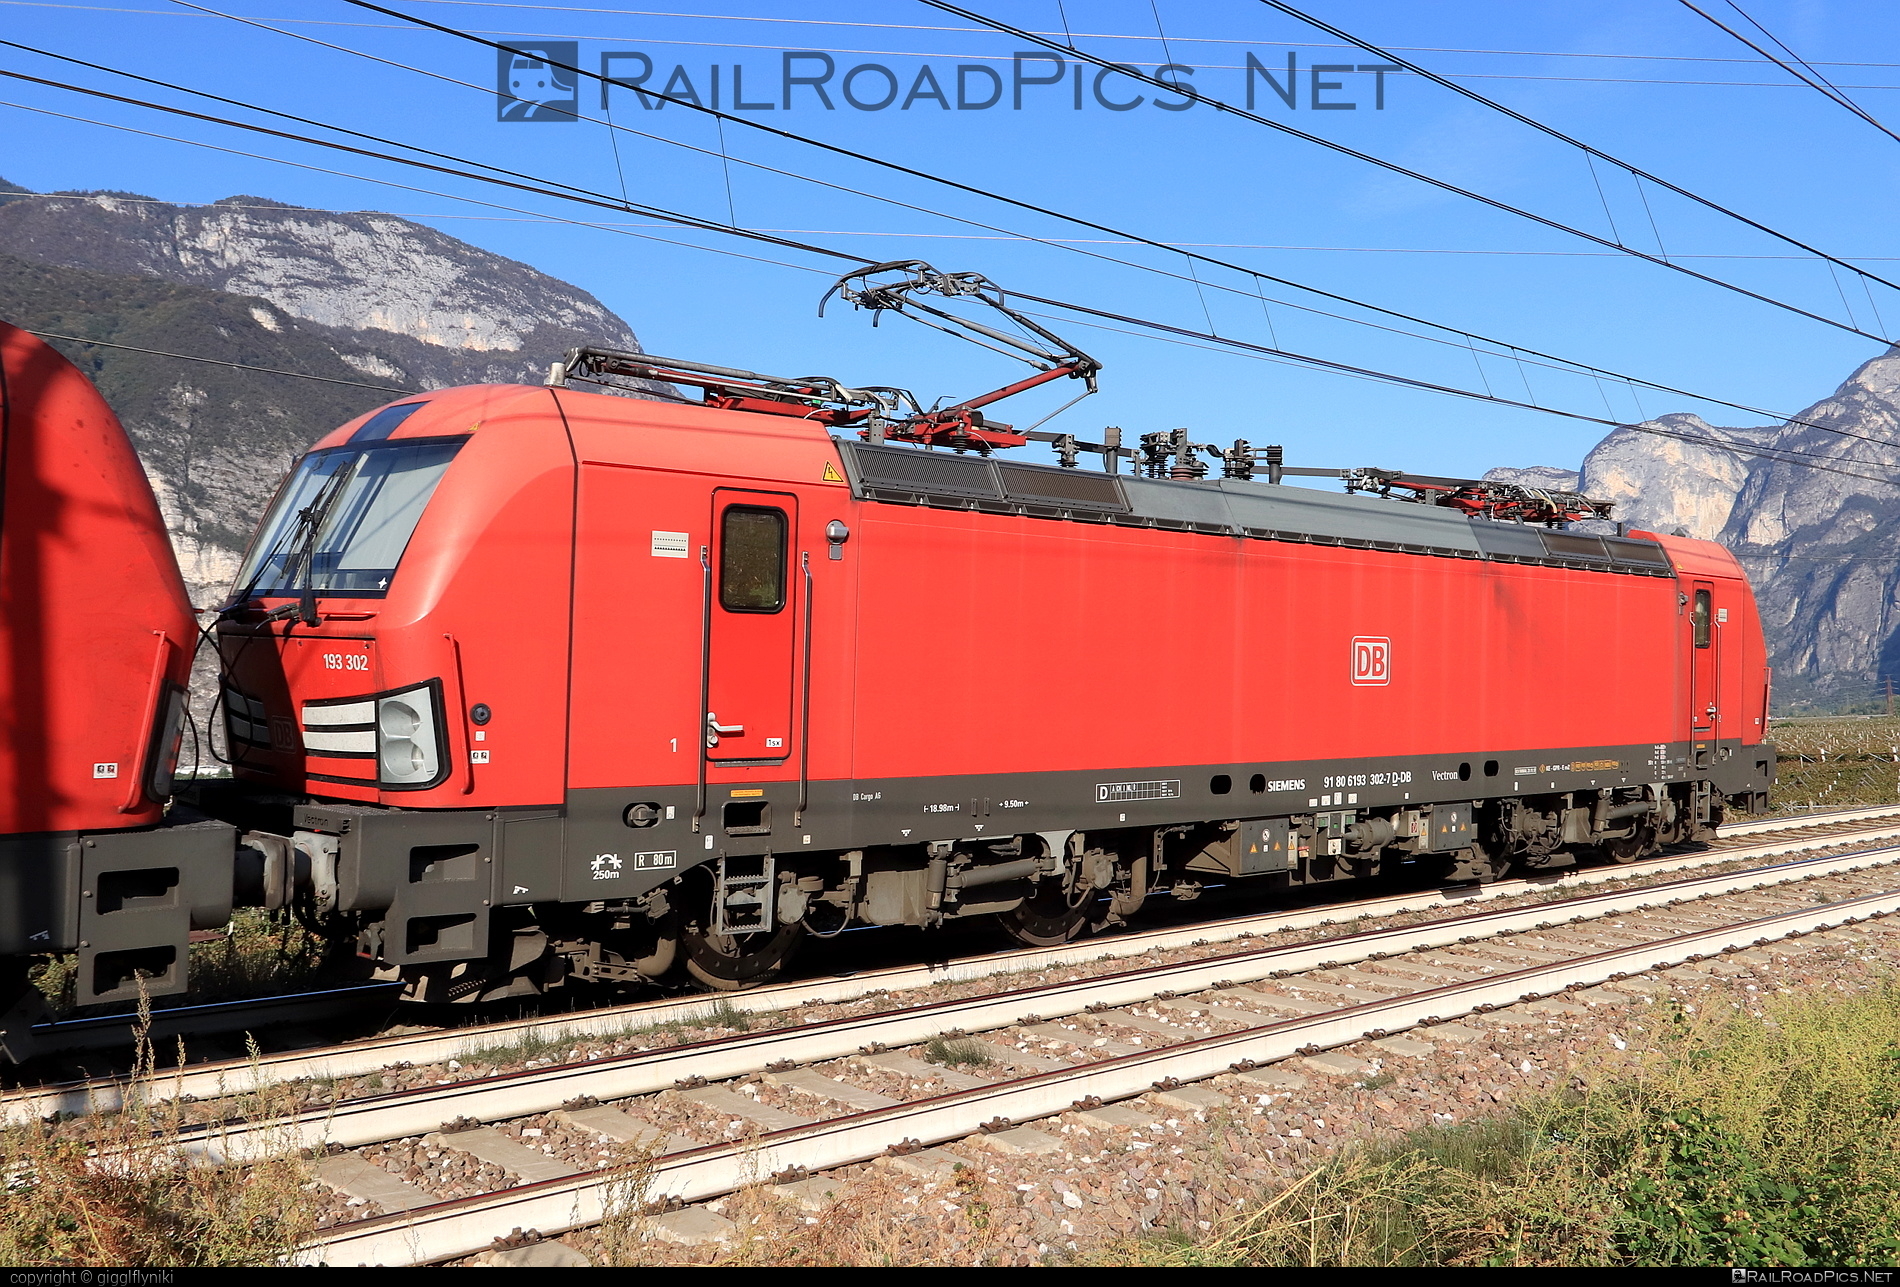 Siemens Vectron MS - 193 302 operated by DB Cargo AG #db #dbcargo #dbcargoag #deutschebahn #siemens #siemensVectron #siemensVectronMS #vectron #vectronMS